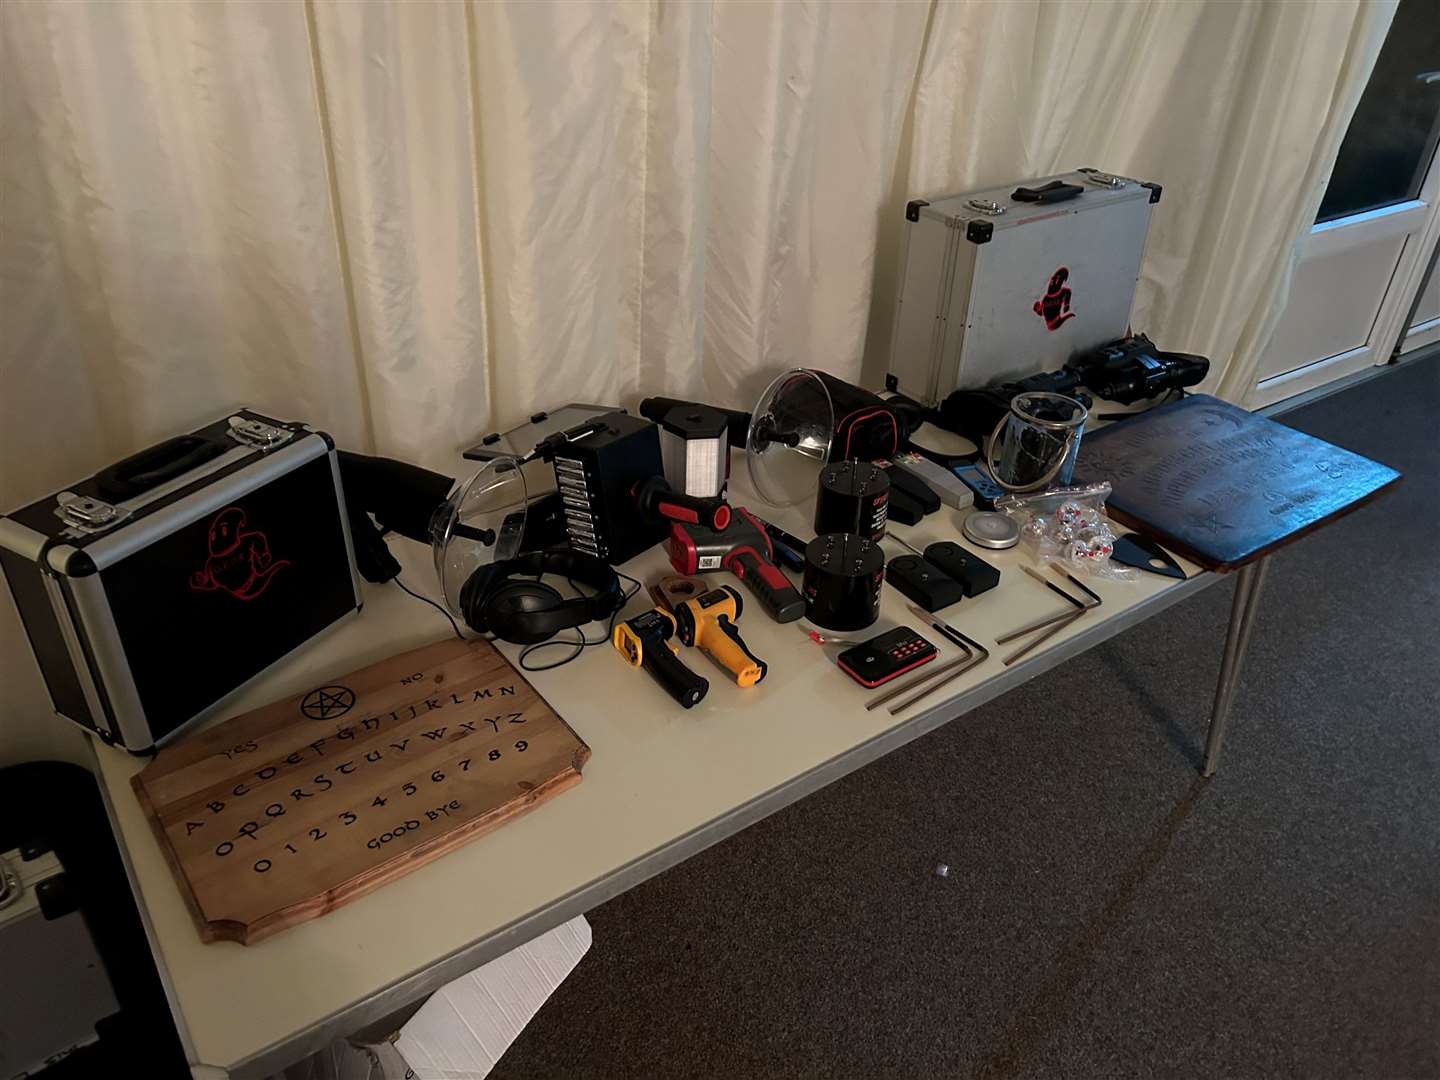 The equipment used on the paranormal investigation